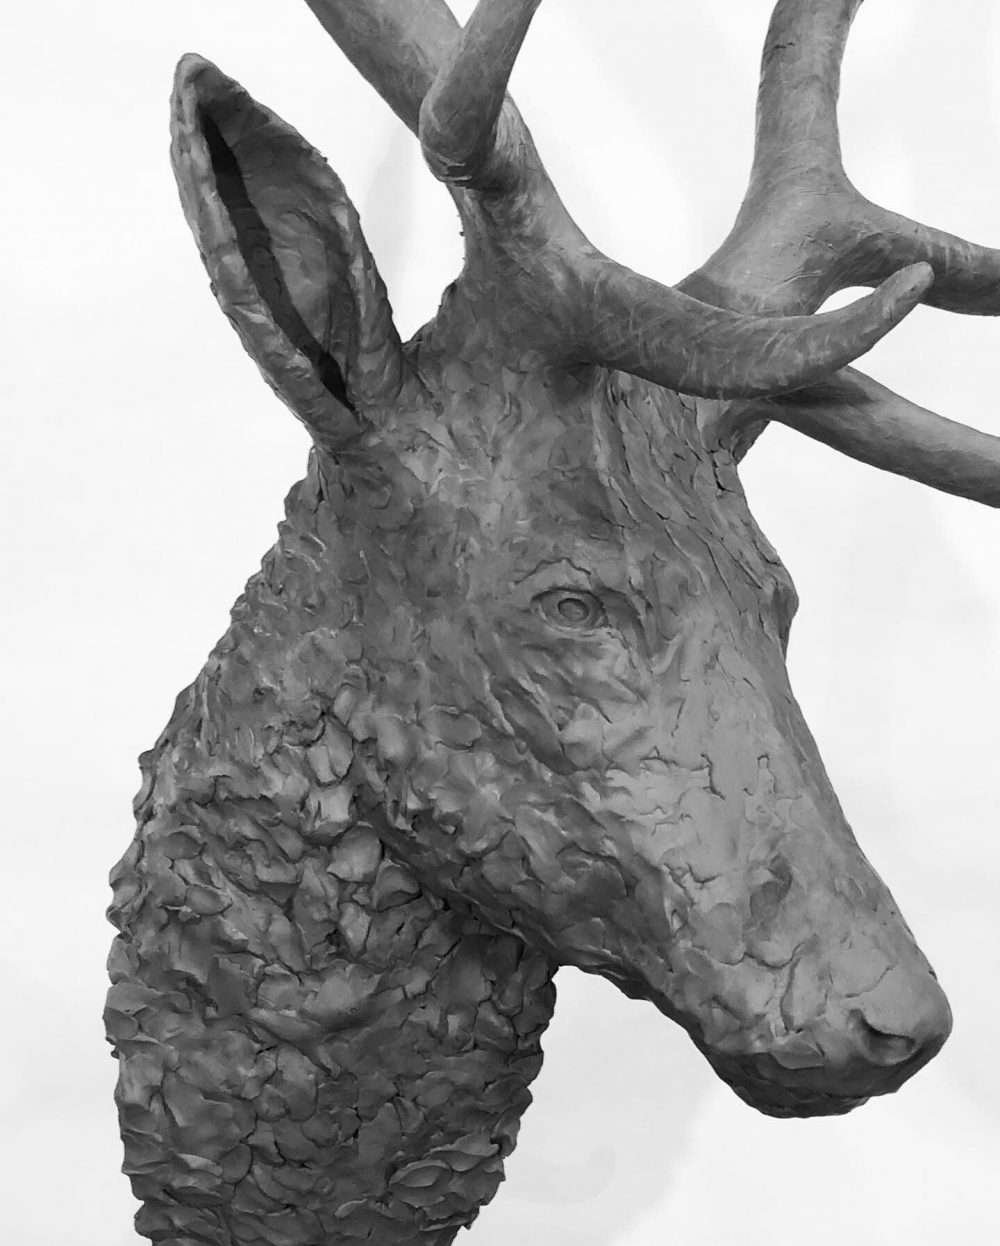 stag head sculpture close up view